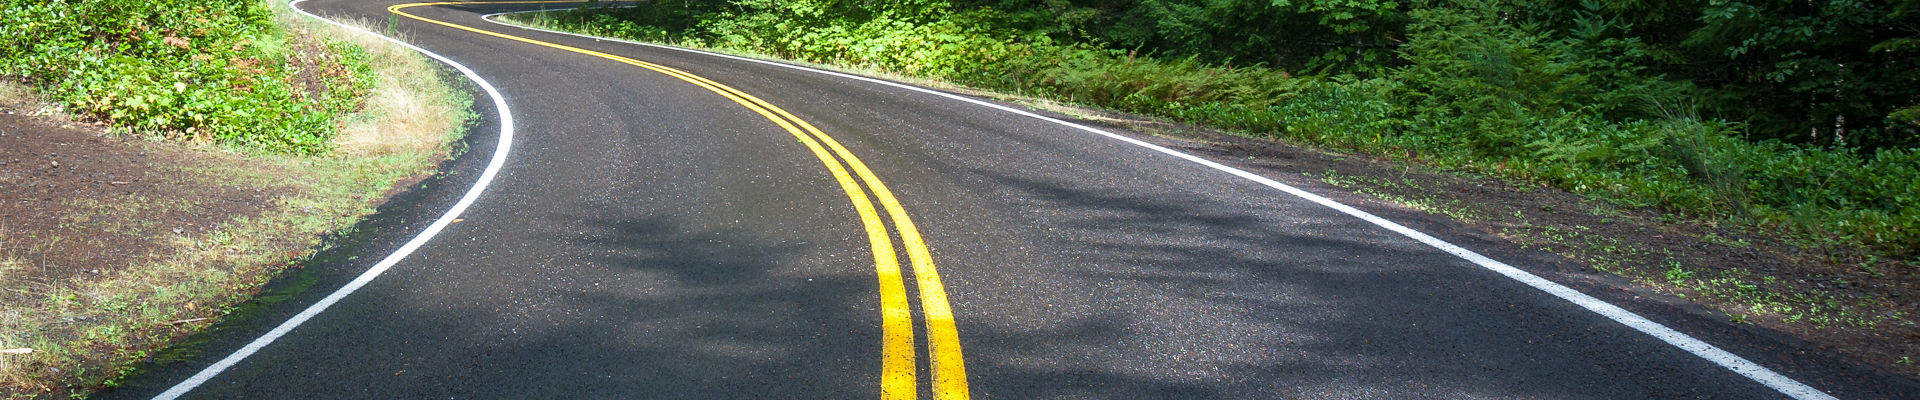 Winding black asphalt pavement with yellow road markings in the middle of pine forest